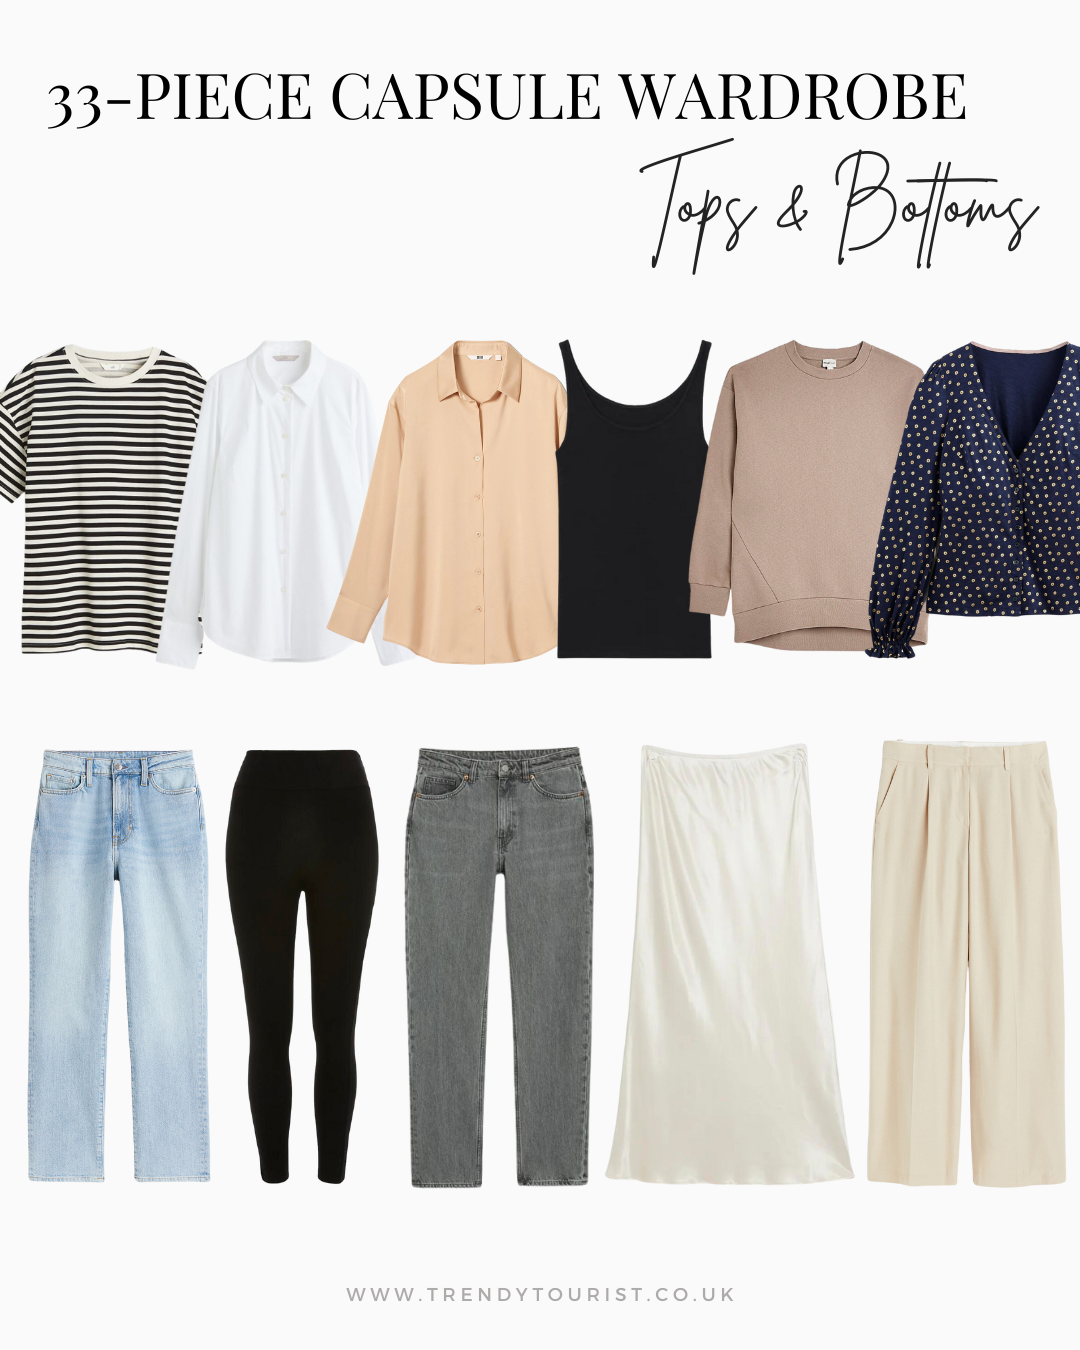 Capsule Wardrobe Tops and Bottoms